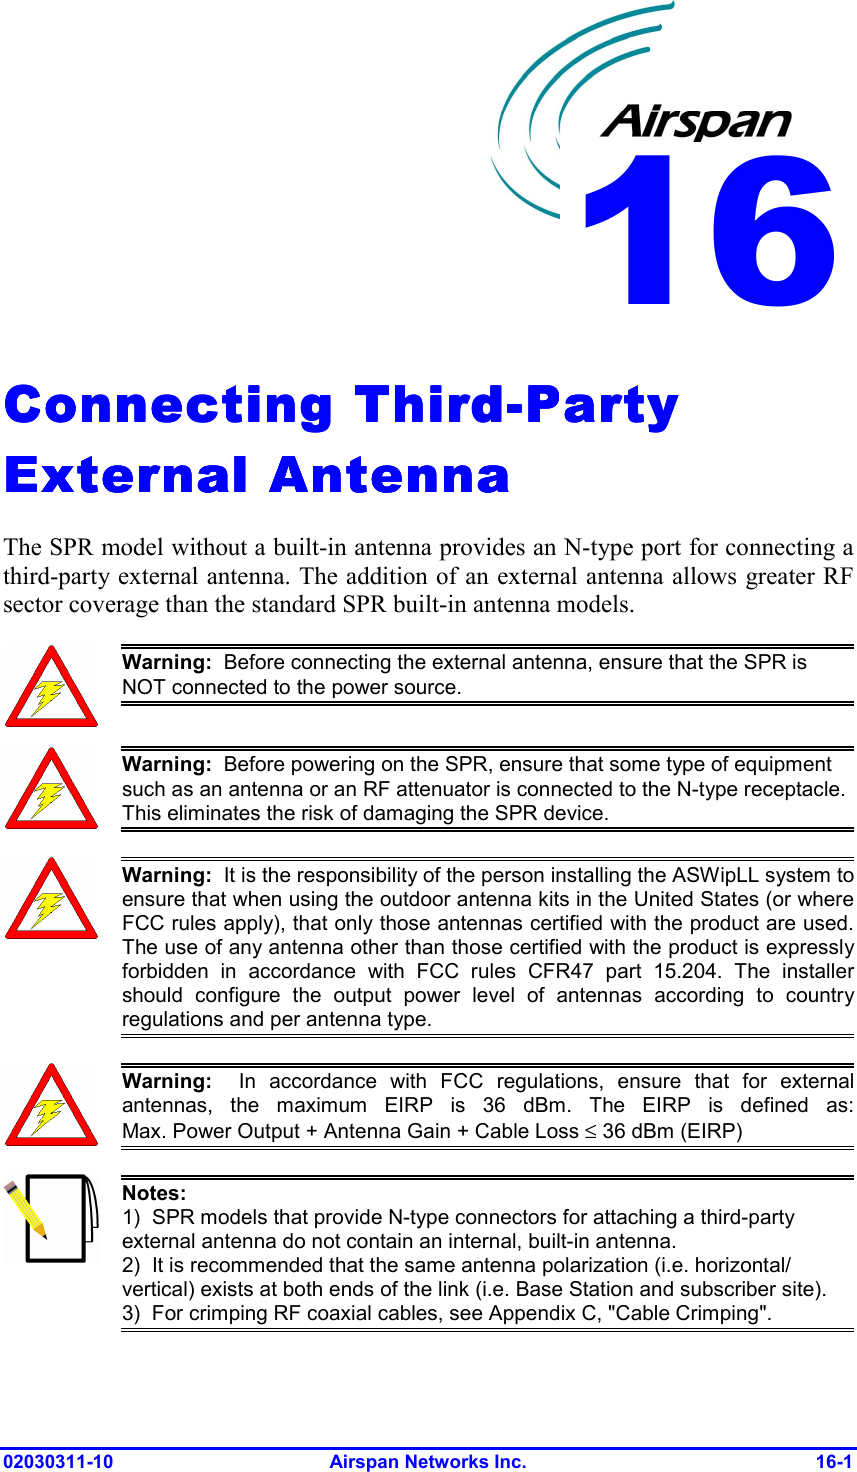  02030311-10 Airspan Networks Inc.  16-1 Connecting ThirdConnecting ThirdConnecting ThirdConnecting Third----Party Party Party Party External AntennaExternal AntennaExternal AntennaExternal Antenna    The SPR model without a built-in antenna provides an N-type port for connecting a third-party external antenna. The addition of an external antenna allows greater RF sector coverage than the standard SPR built-in antenna models.  Warning:  Before connecting the external antenna, ensure that the SPR is NOT connected to the power source.   Warning:  Before powering on the SPR, ensure that some type of equipment such as an antenna or an RF attenuator is connected to the N-type receptacle. This eliminates the risk of damaging the SPR device.  Warning:  It is the responsibility of the person installing the ASWipLL system toensure that when using the outdoor antenna kits in the United States (or whereFCC rules apply), that only those antennas certified with the product are used.The use of any antenna other than those certified with the product is expresslyforbidden in accordance with FCC rules CFR47 part 15.204. The installershould configure the output power level of antennas according to countryregulations and per antenna type.  Warning:  In accordance with FCC regulations, ensure that for externalantennas, the maximum EIRP is 36 dBm. The EIRP is defined as:Max. Power Output + Antenna Gain + Cable Loss ≤ 36 dBm (EIRP)  Notes: 1)  SPR models that provide N-type connectors for attaching a third-party external antenna do not contain an internal, built-in antenna. 2)  It is recommended that the same antenna polarization (i.e. horizontal/ vertical) exists at both ends of the link (i.e. Base Station and subscriber site). 3)  For crimping RF coaxial cables, see Appendix C, &quot;Cable Crimping&quot;. 16